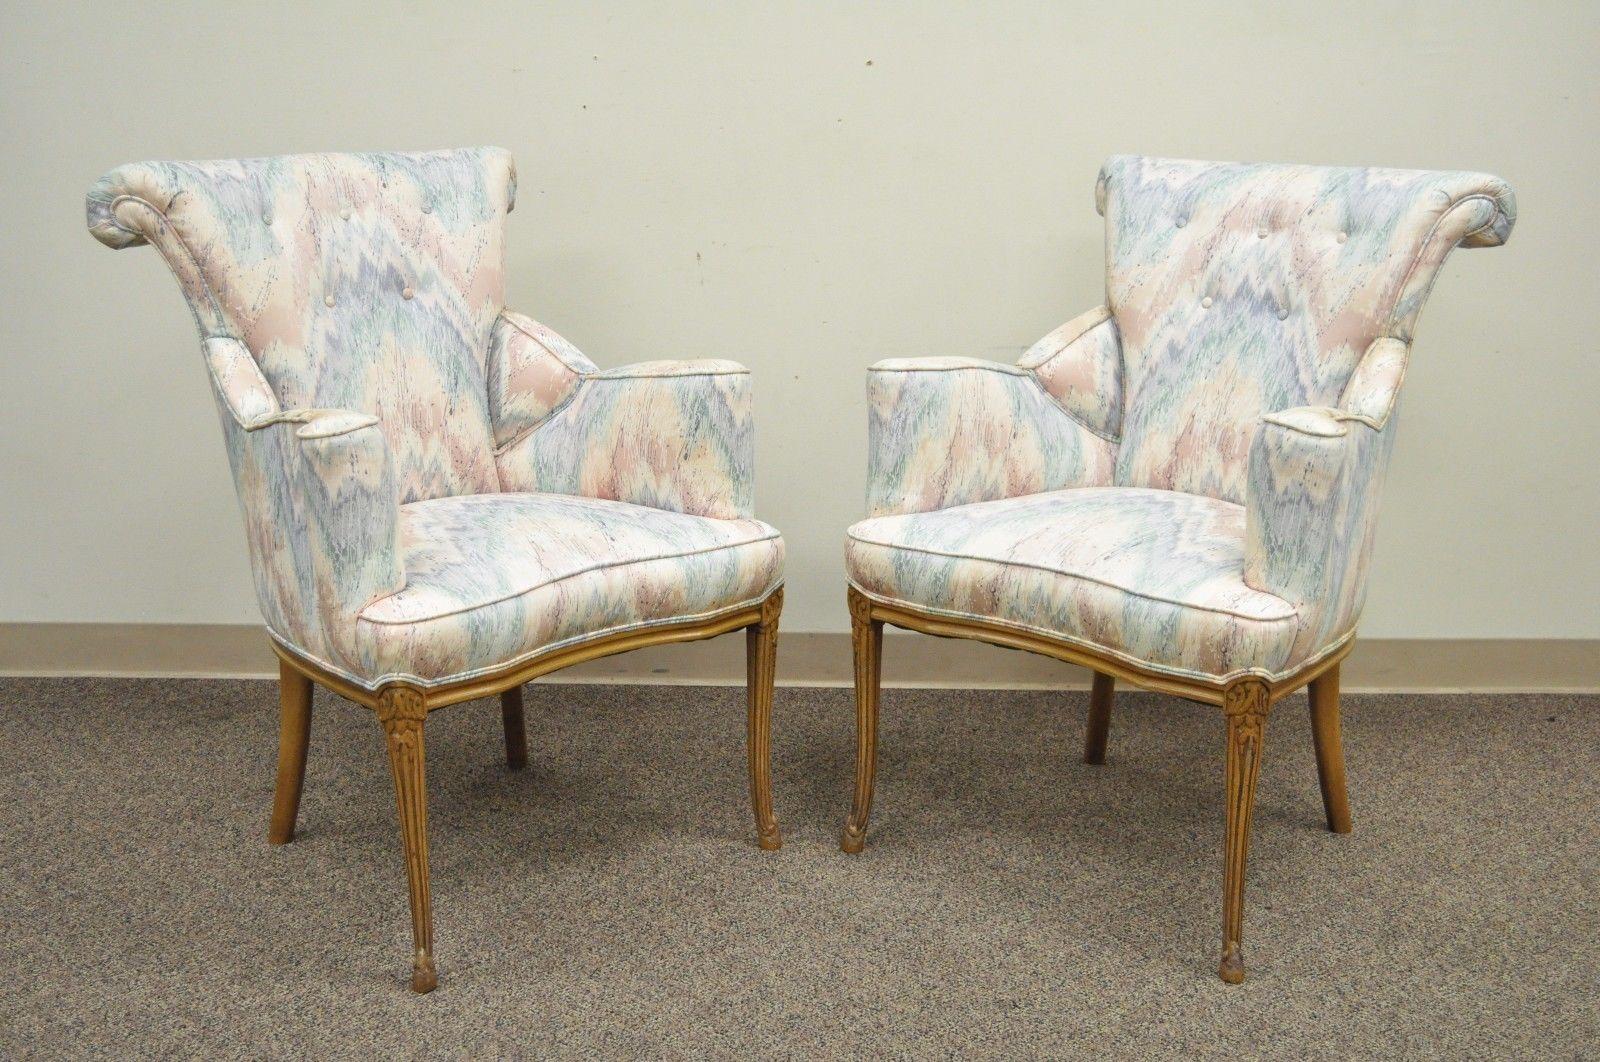 Pair of vintage Hollywood Regency French style fireside lounge chairs. Item features solid mahogany frames, rolled backs, dramatic splayed arms, and carved and tapered legs, circa 1940s, American. Measurements: 37